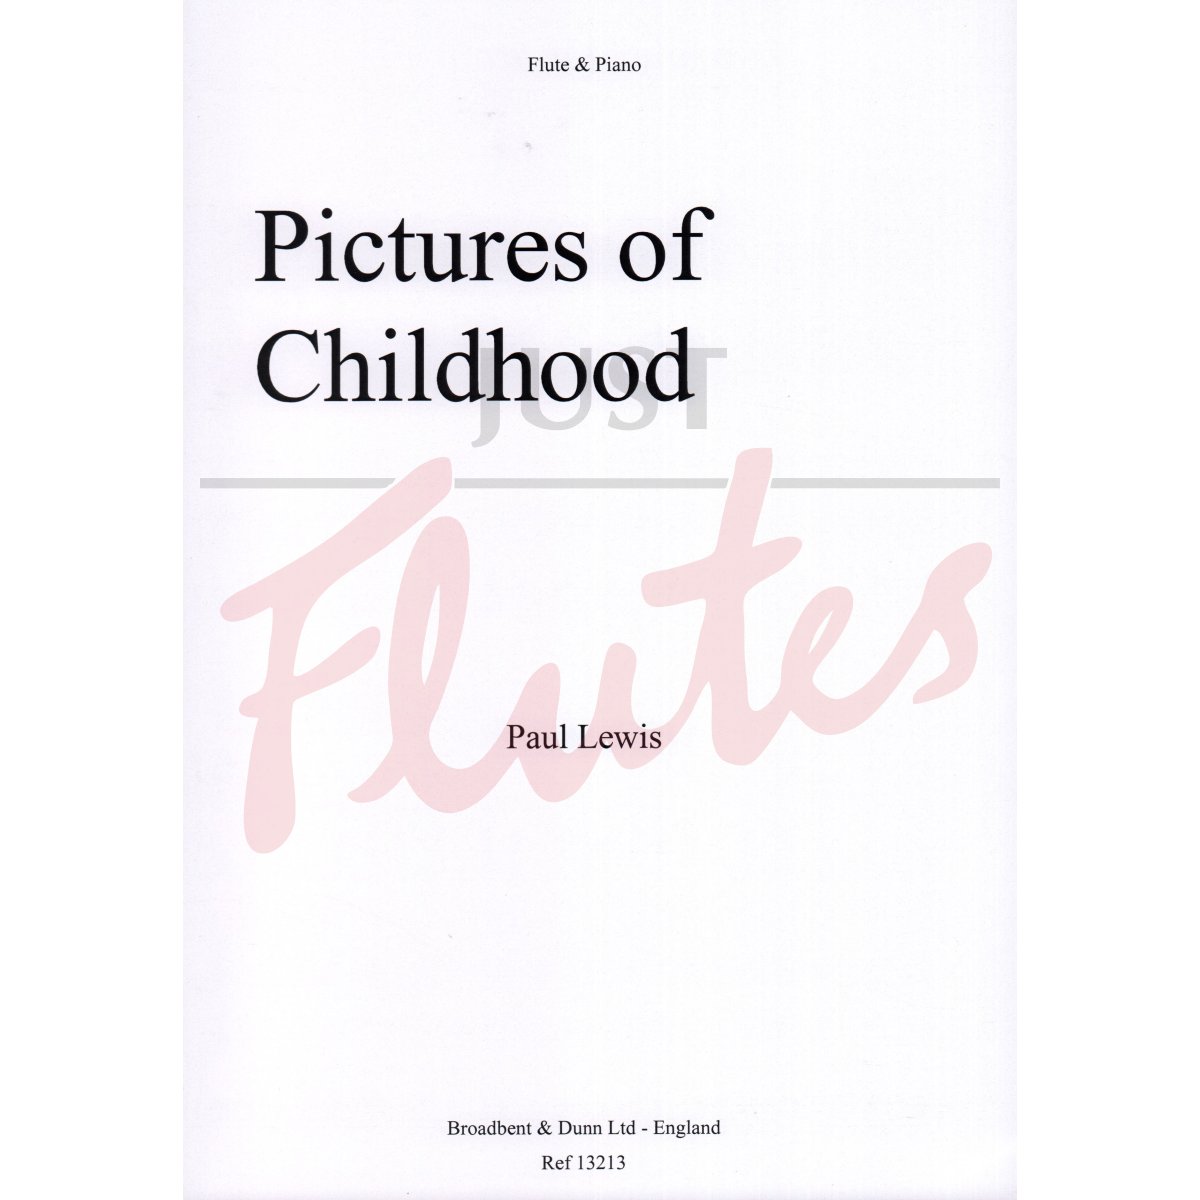 Pictures of Childhood for Flute and Piano